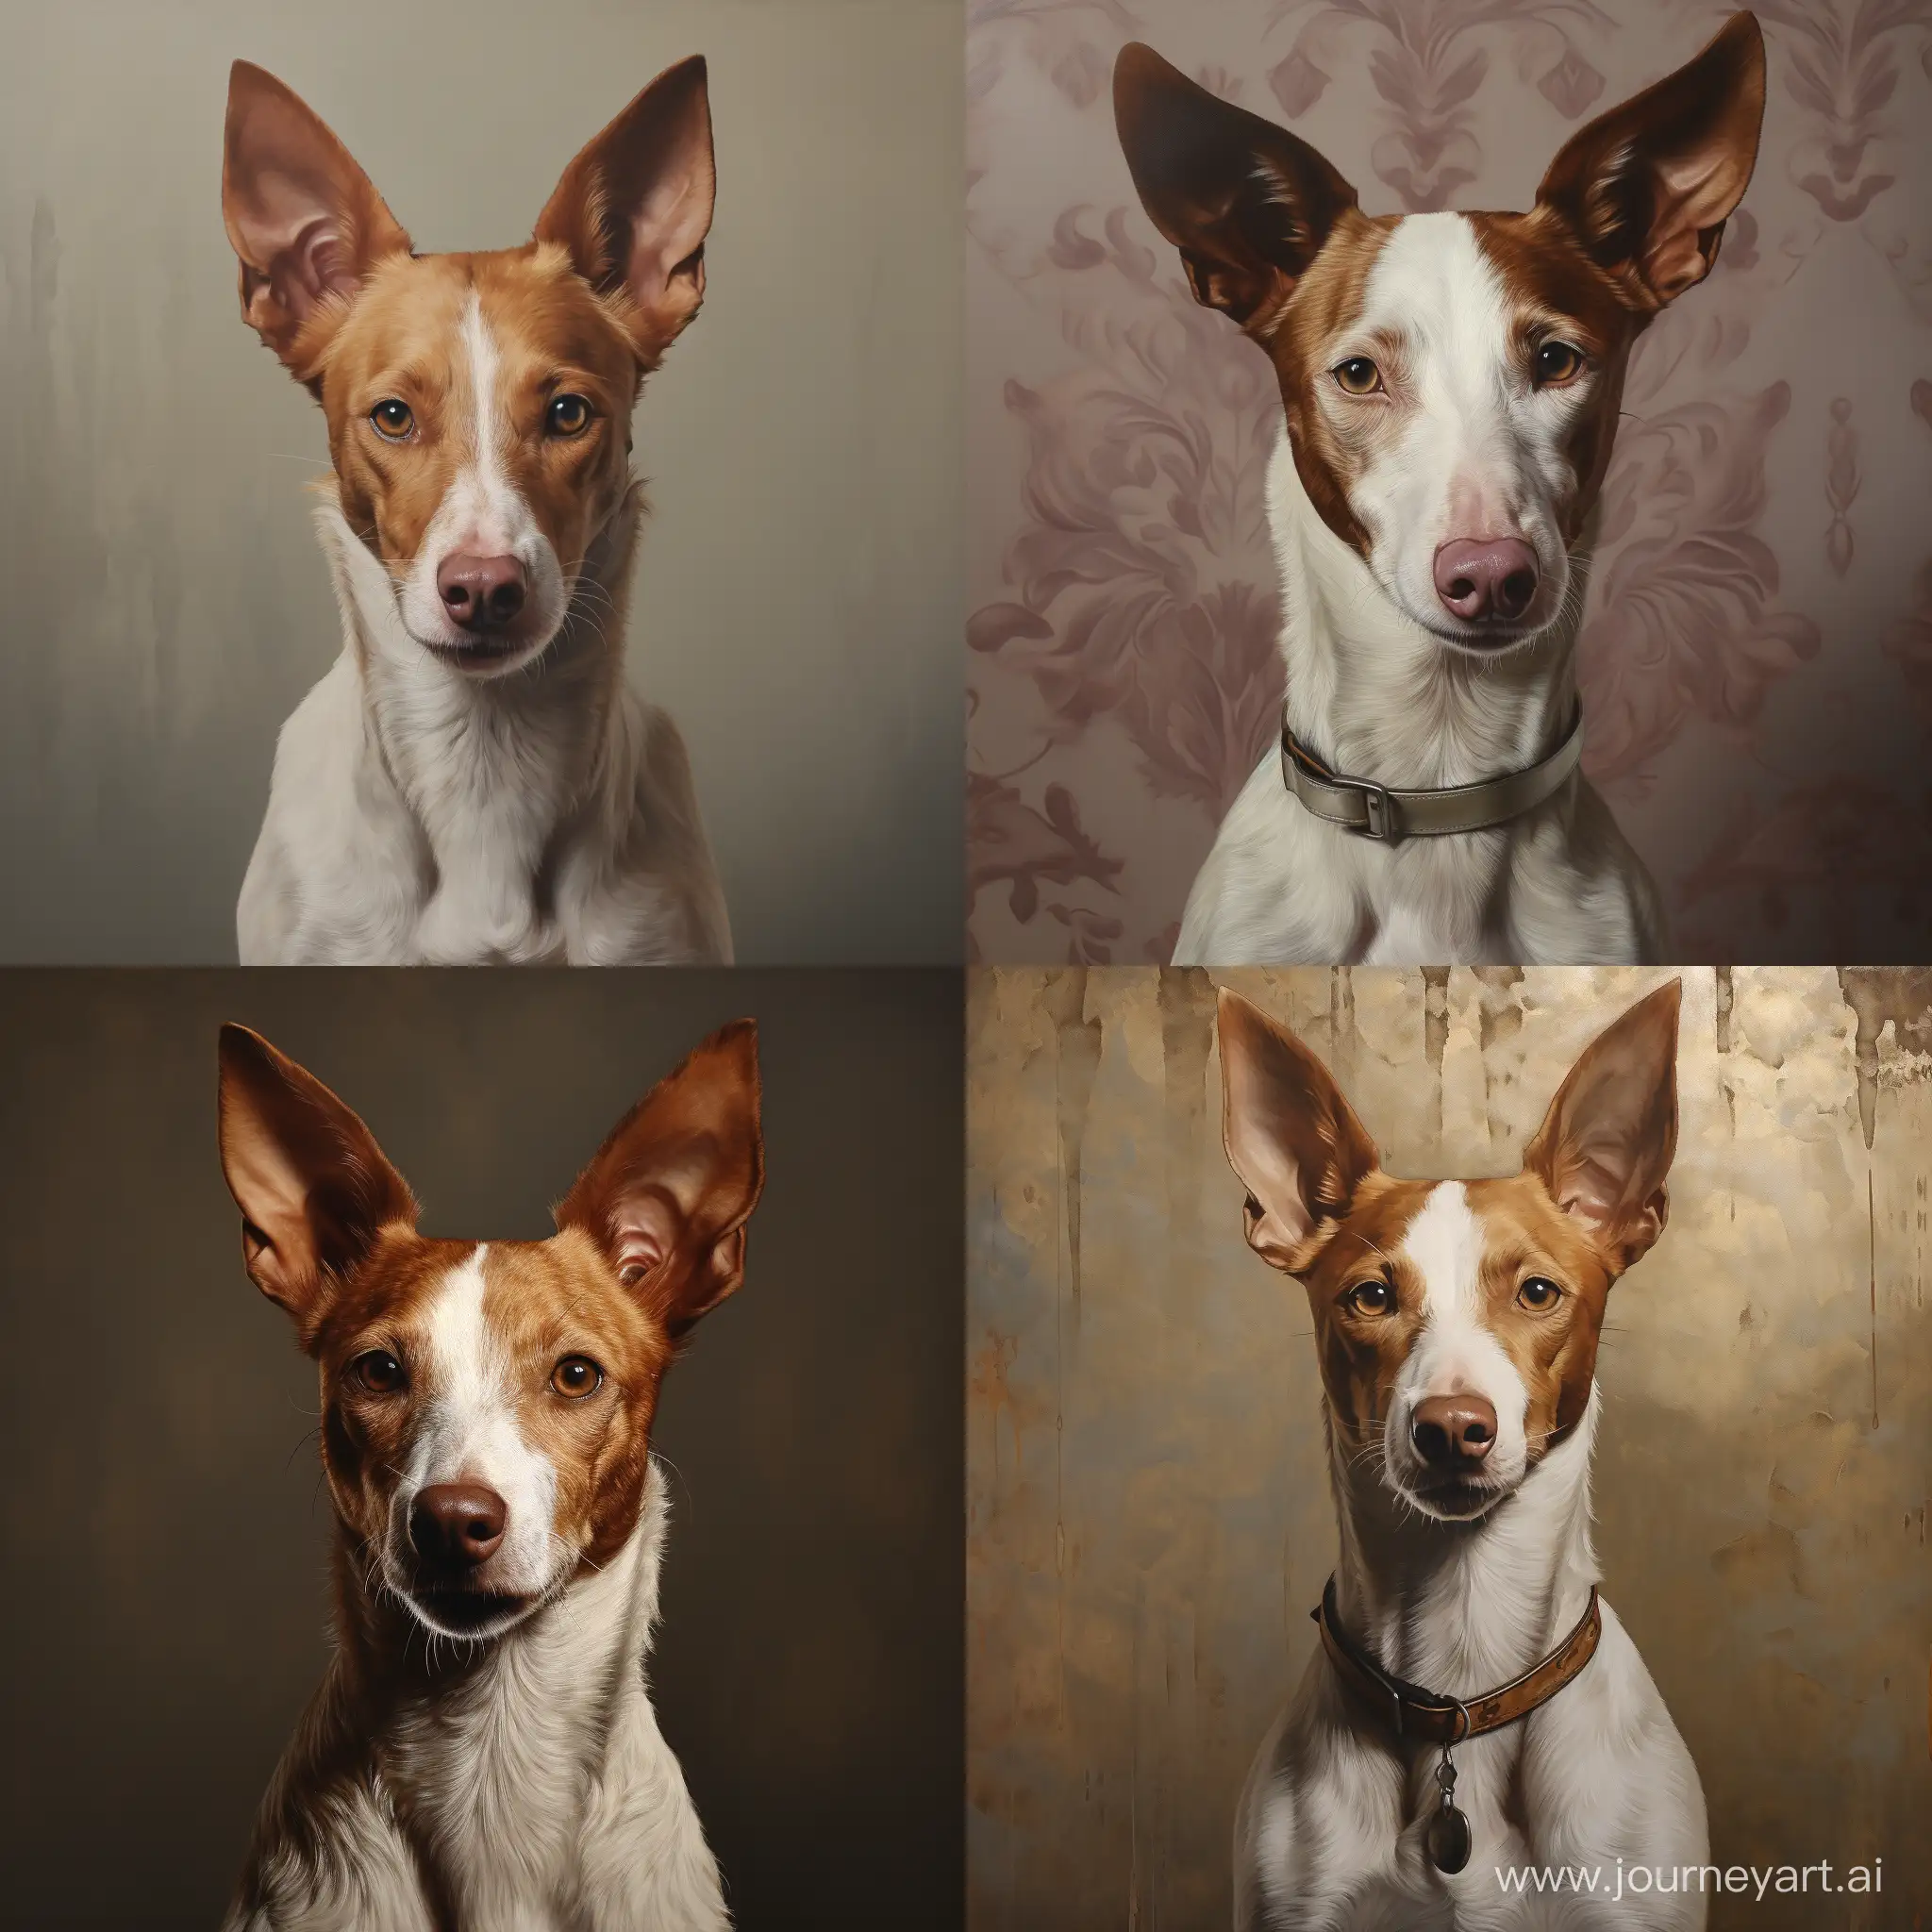 Playful-Podenco-Dog-in-Artistic-Portrait